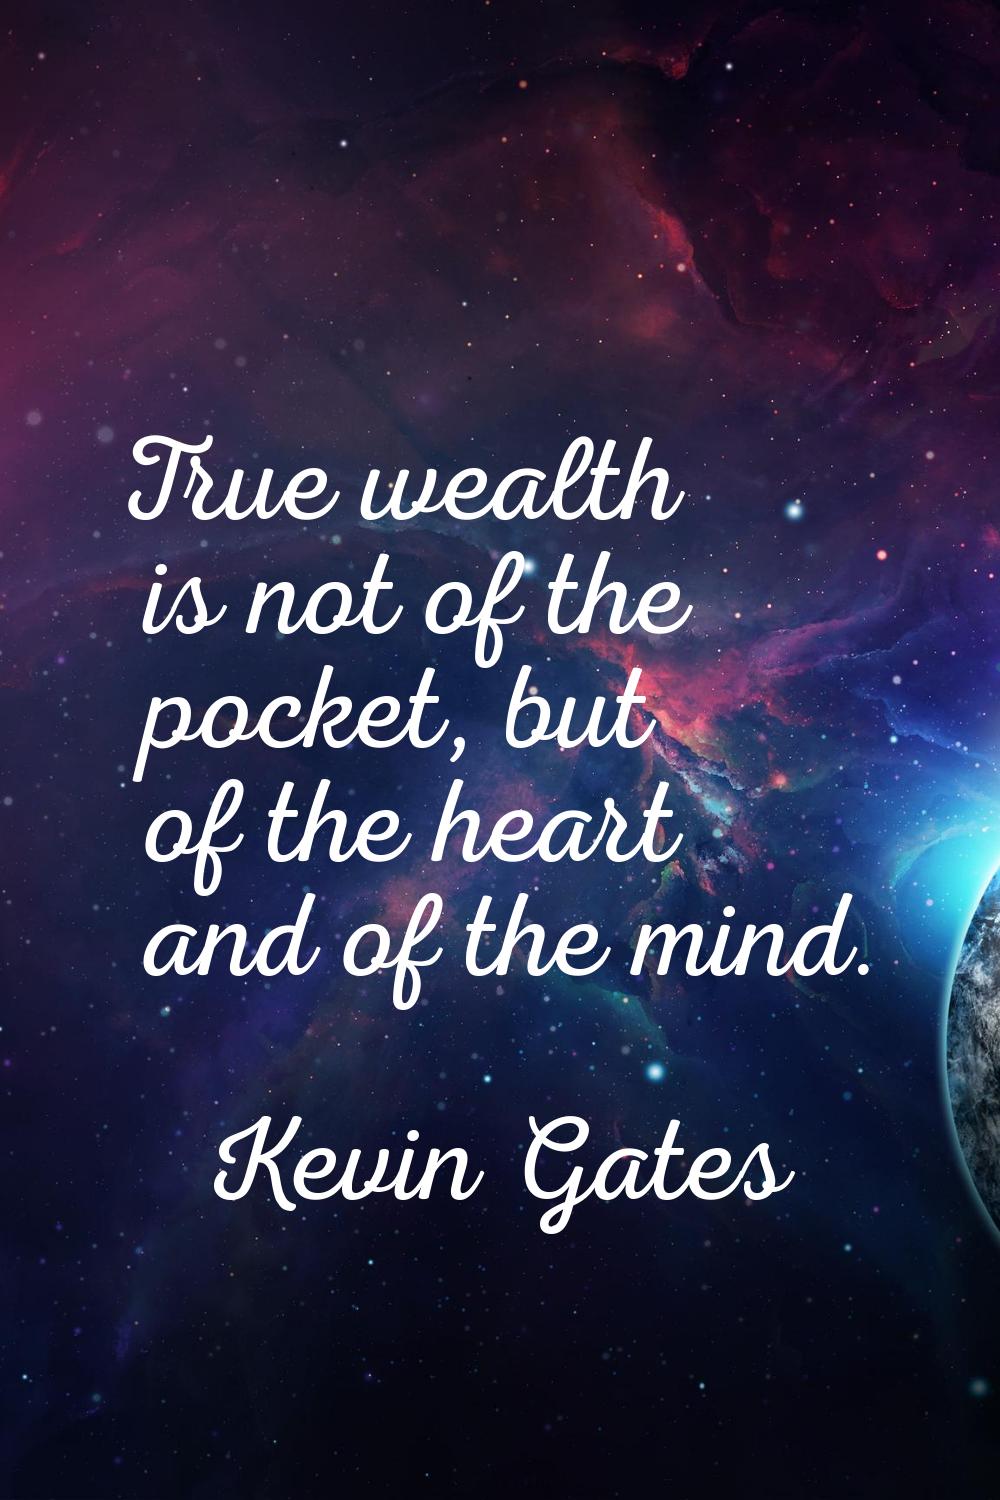 True wealth is not of the pocket, but of the heart and of the mind.